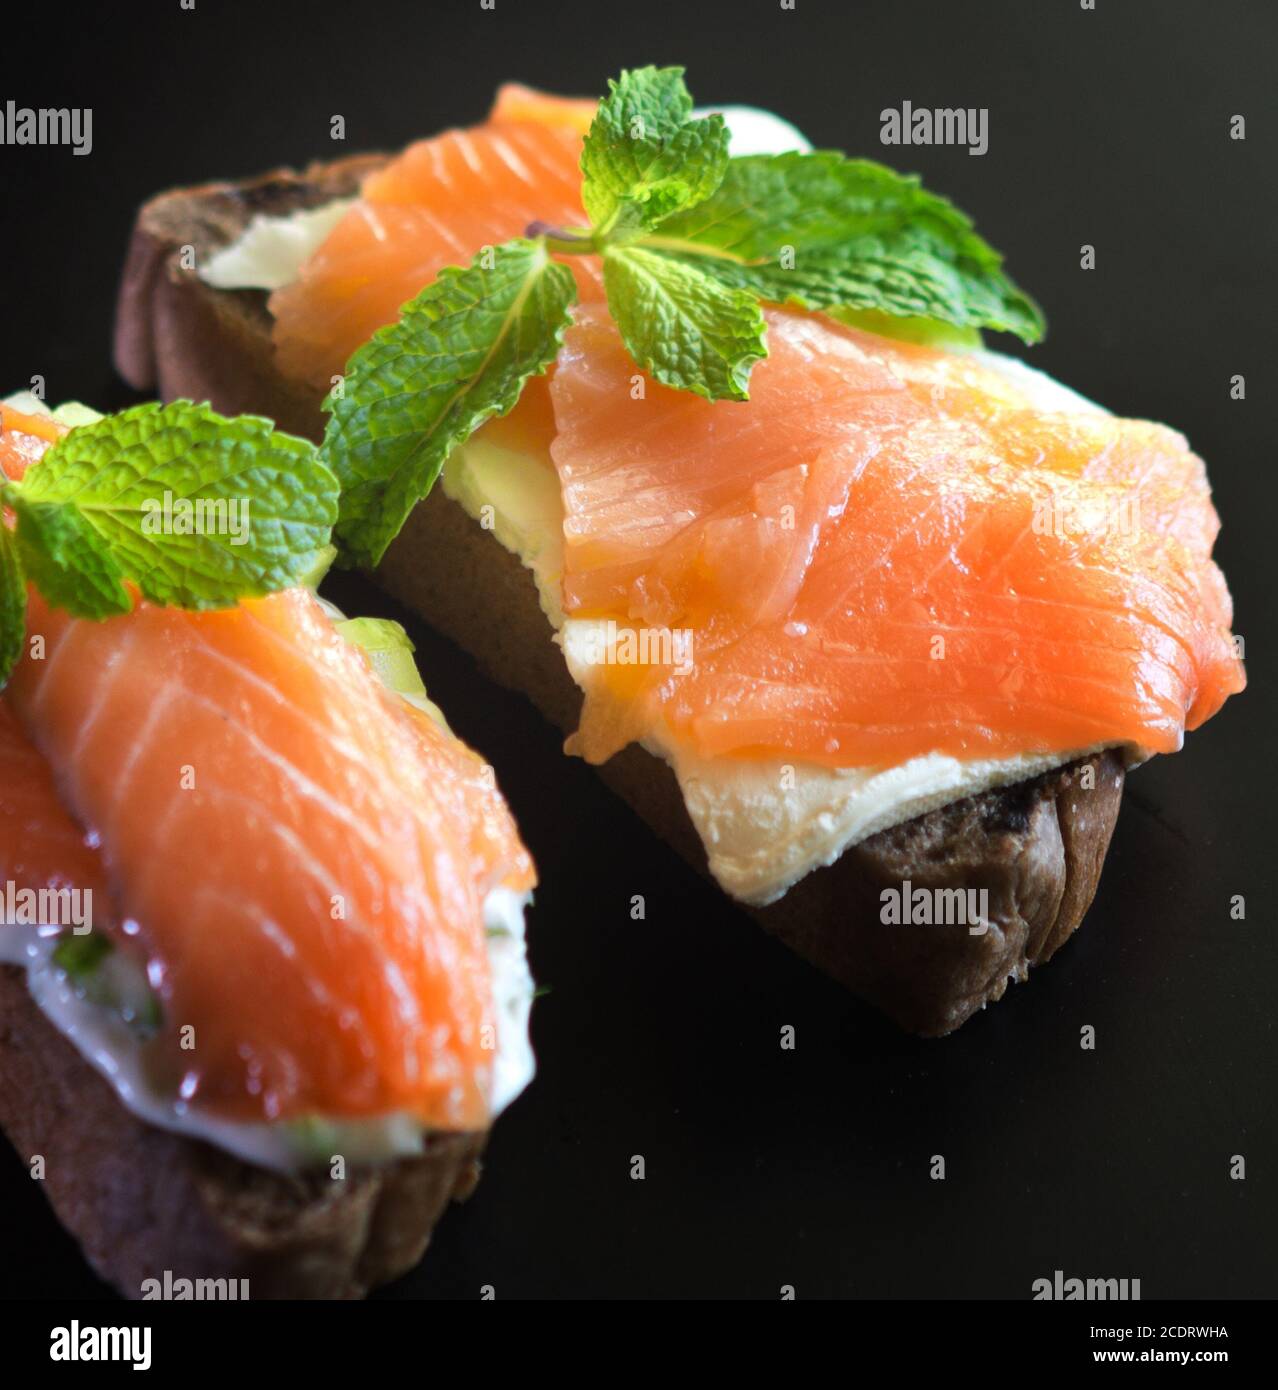 sandwiches with red fish Stock Photo